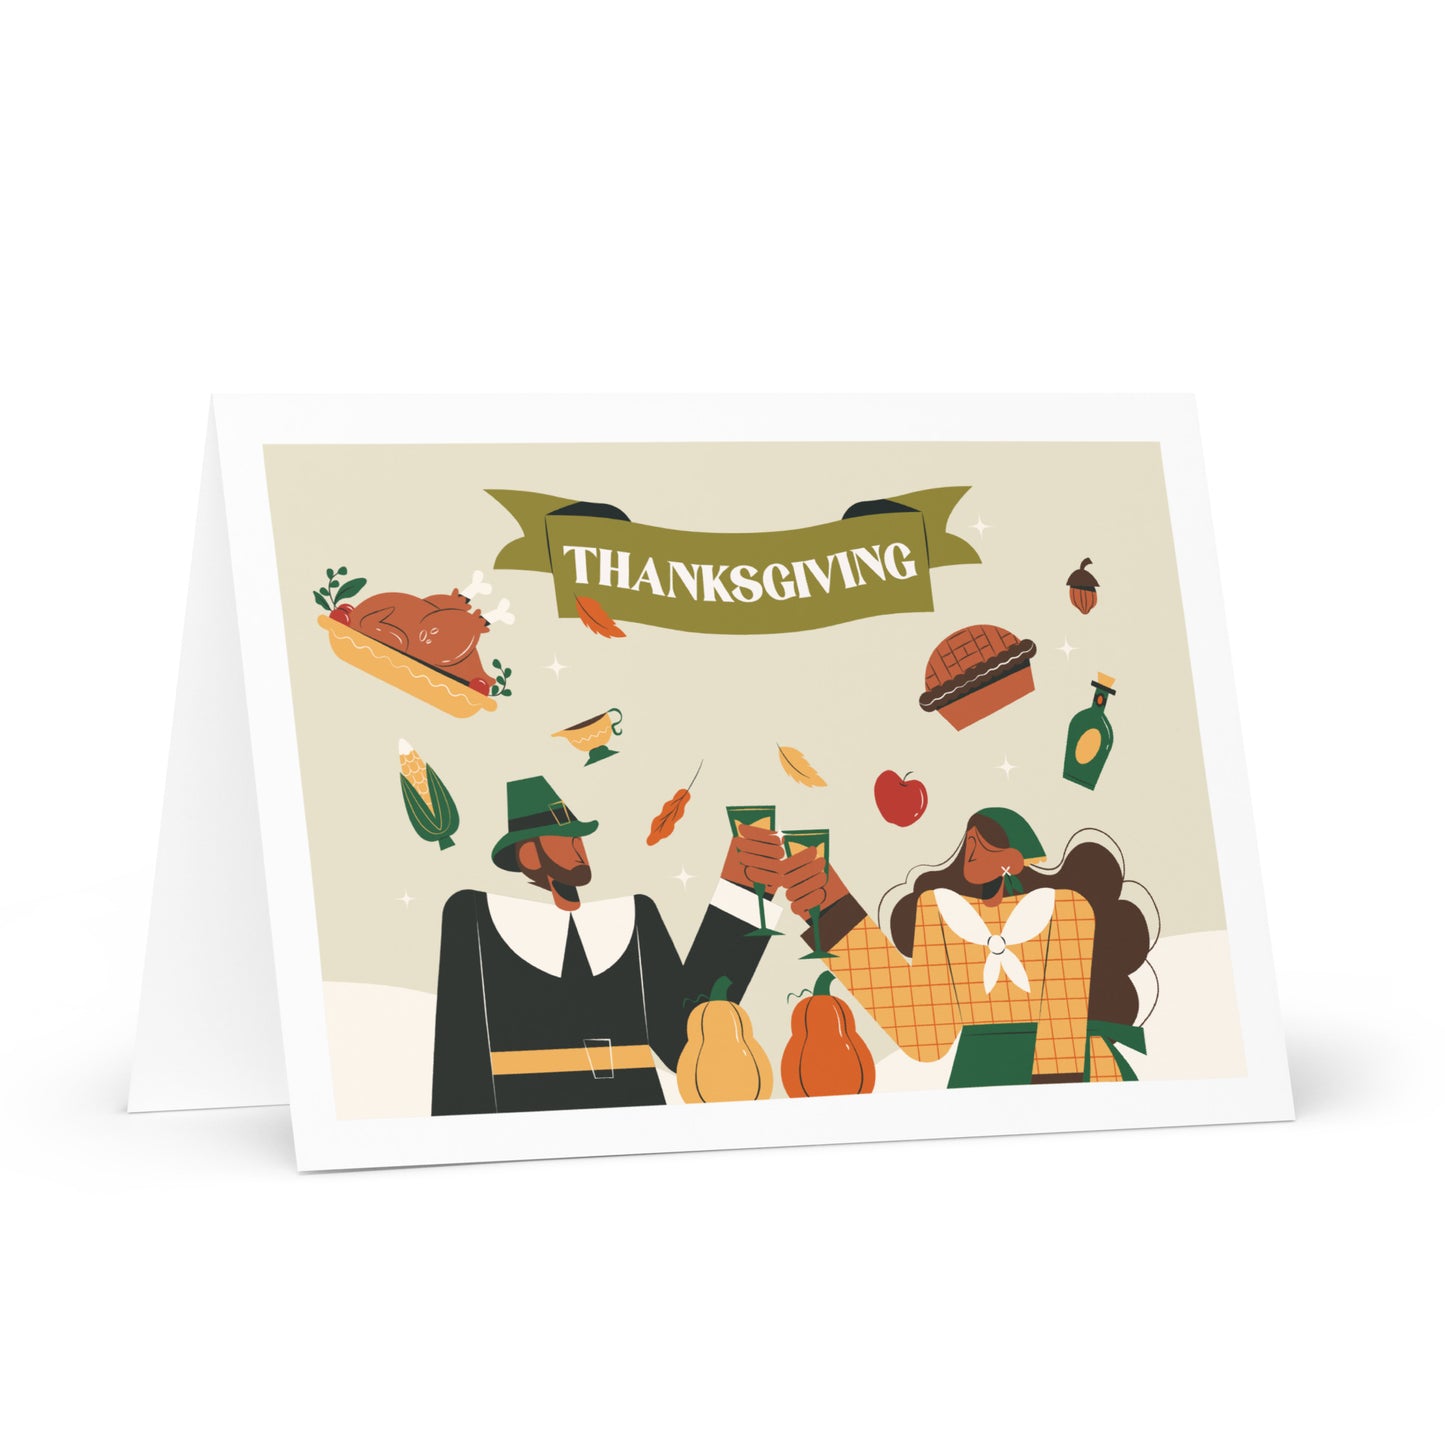 Thanksgiving Toast - A Celebration of Family, food, and Gratitude: Greeting Card